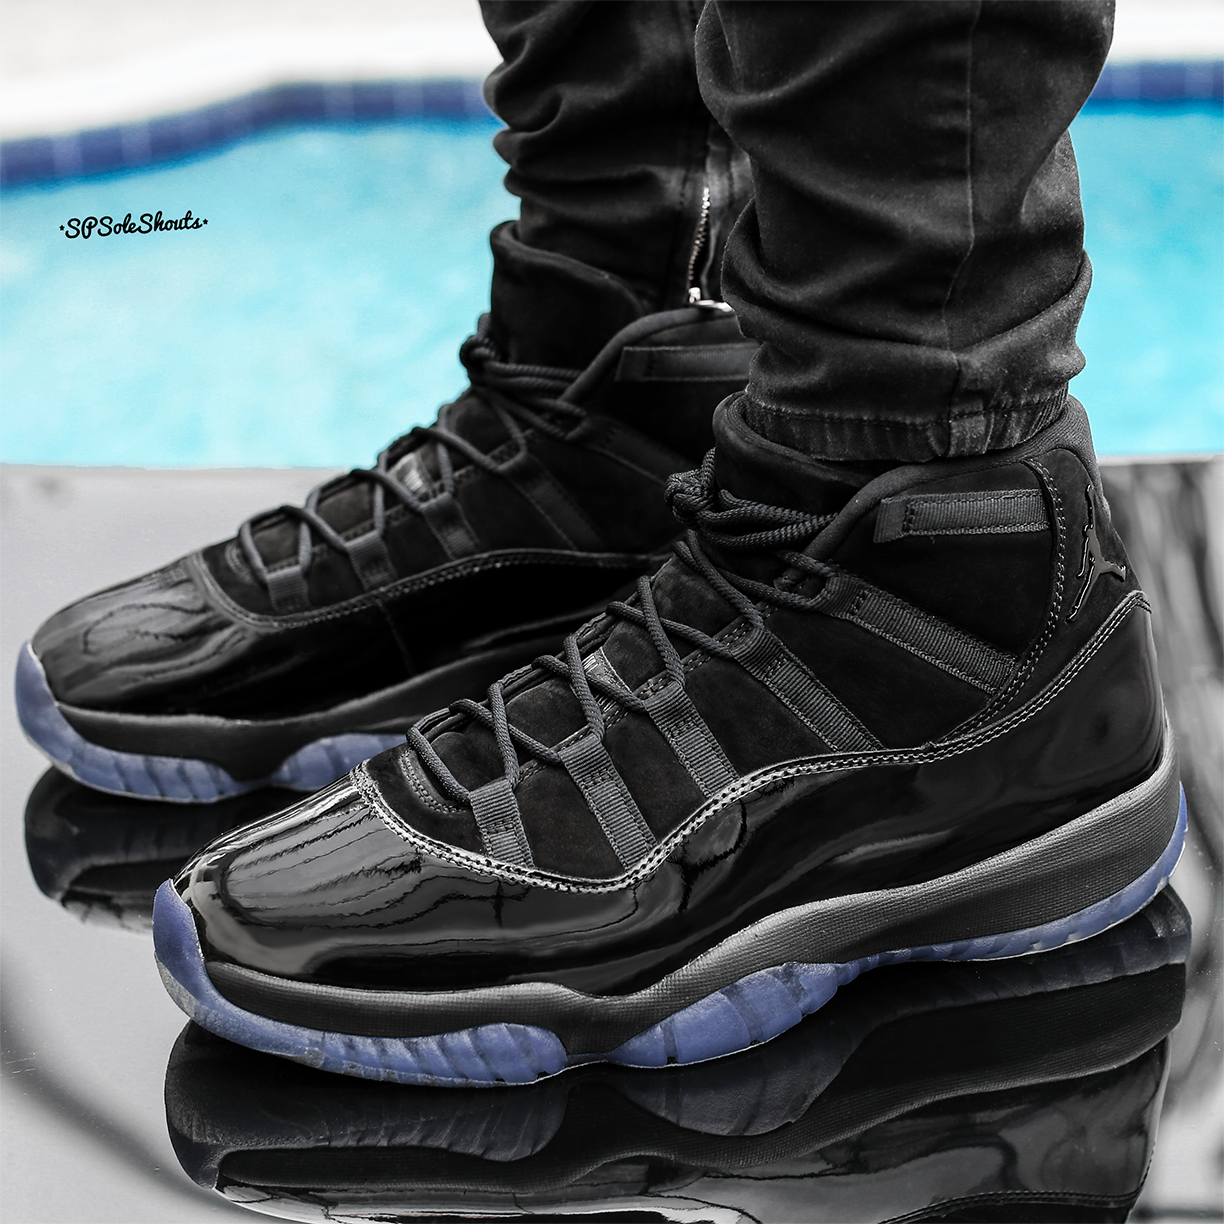 cap and gown 11s on feet 3bc071